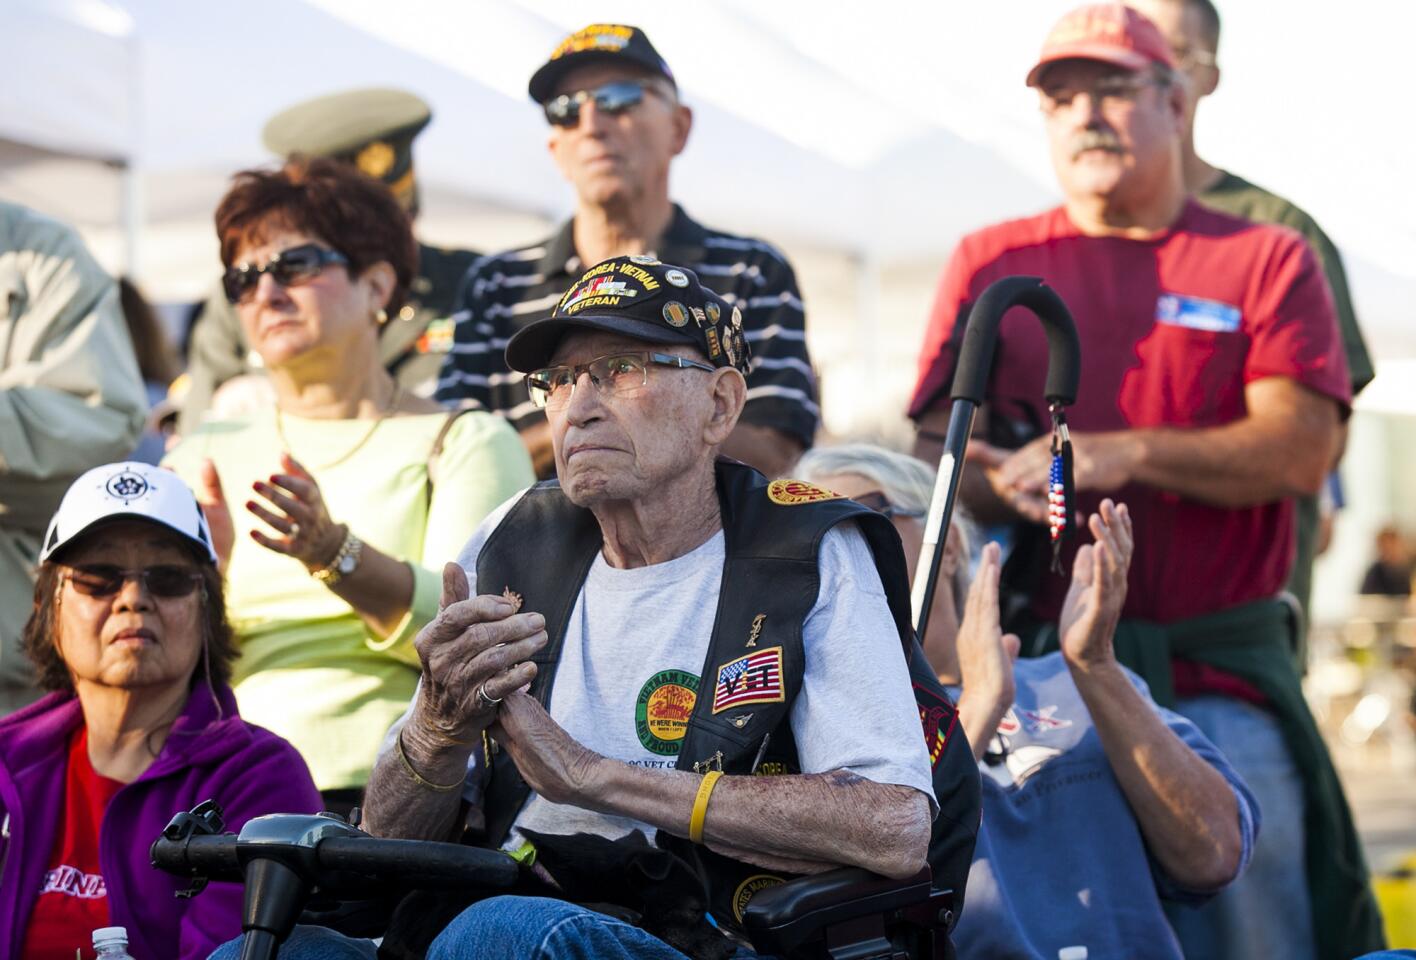 Robert Buck Rogers, a U.S. Marine Corps veteran who served in World War II, Korea and Vietnam claps during the Vietnam war veterans recognition ceremony at the 2015 Orange County Veterans Day community celebration.